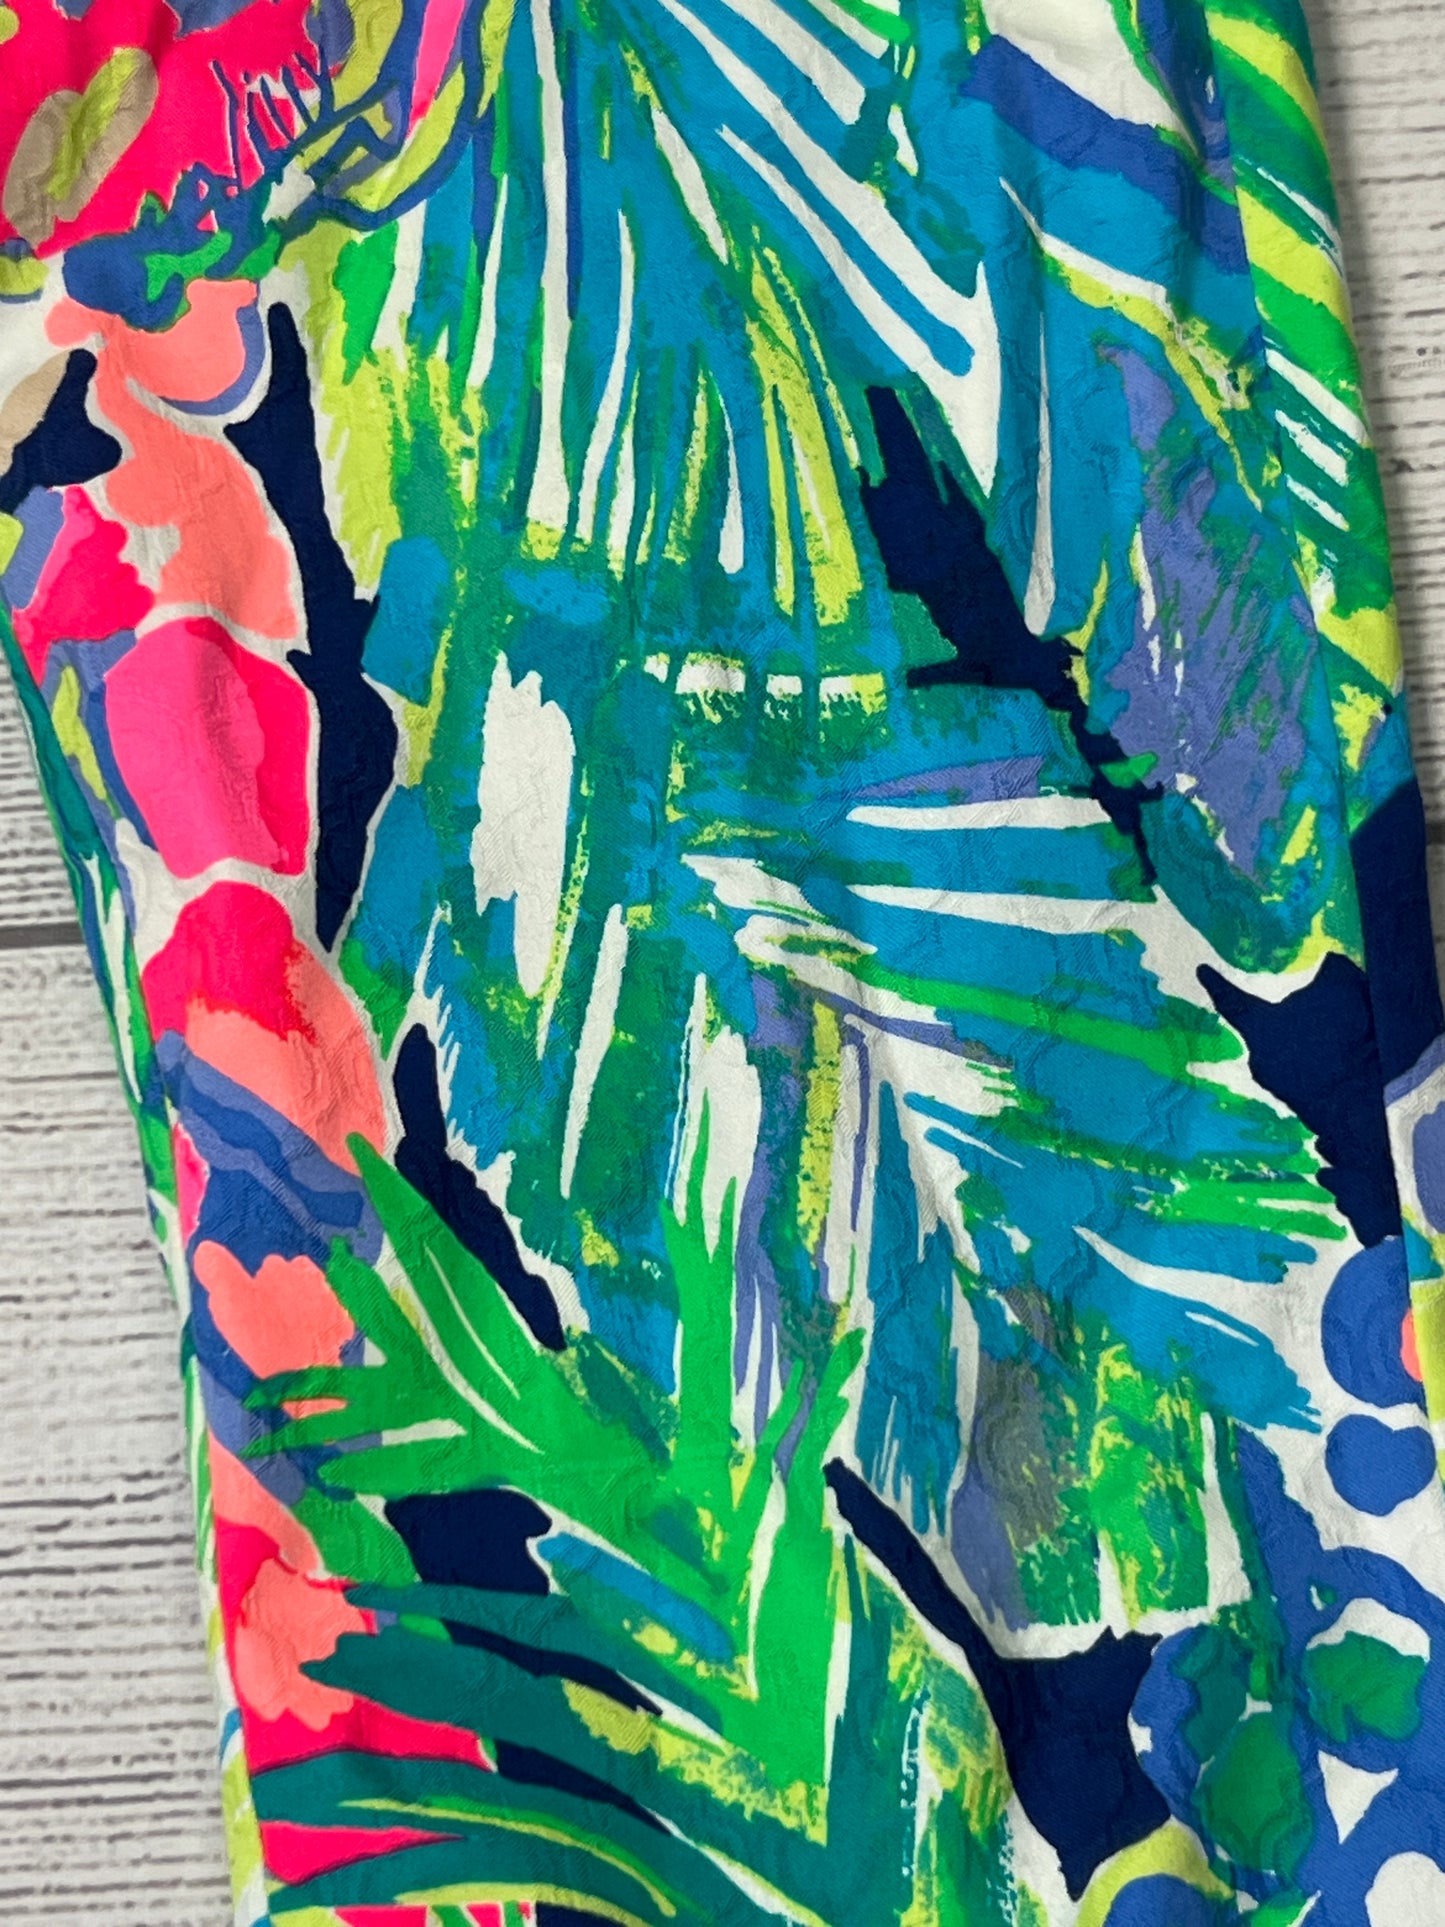 Blue Green Pants Ankle Lilly Pulitzer, Size 2